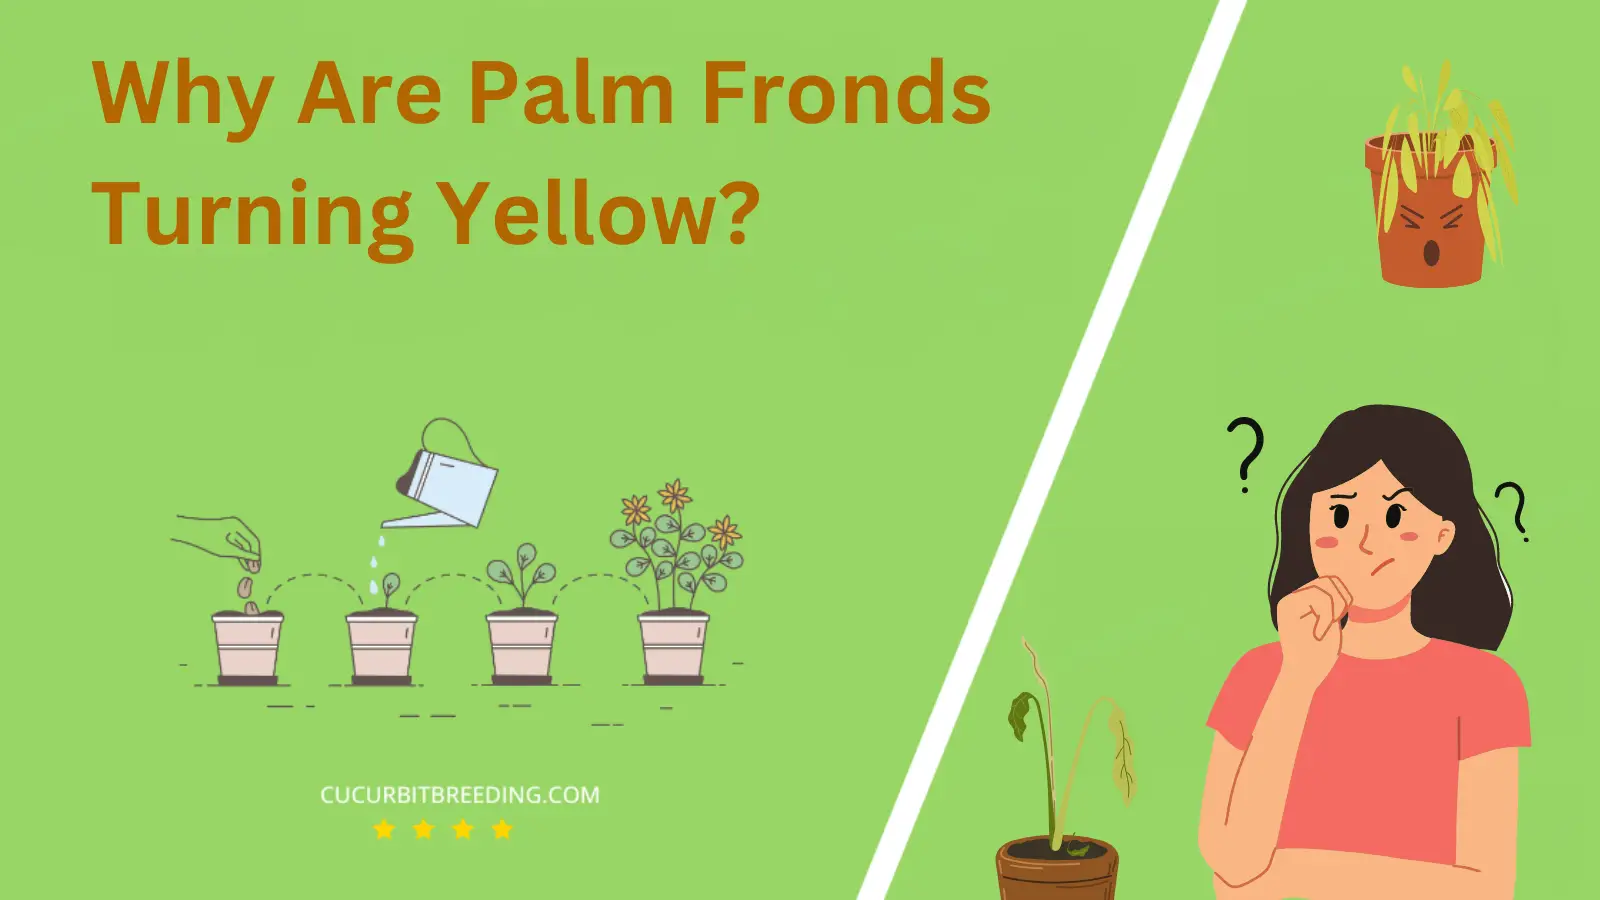 Why Are Palm Fronds Turning Yellow